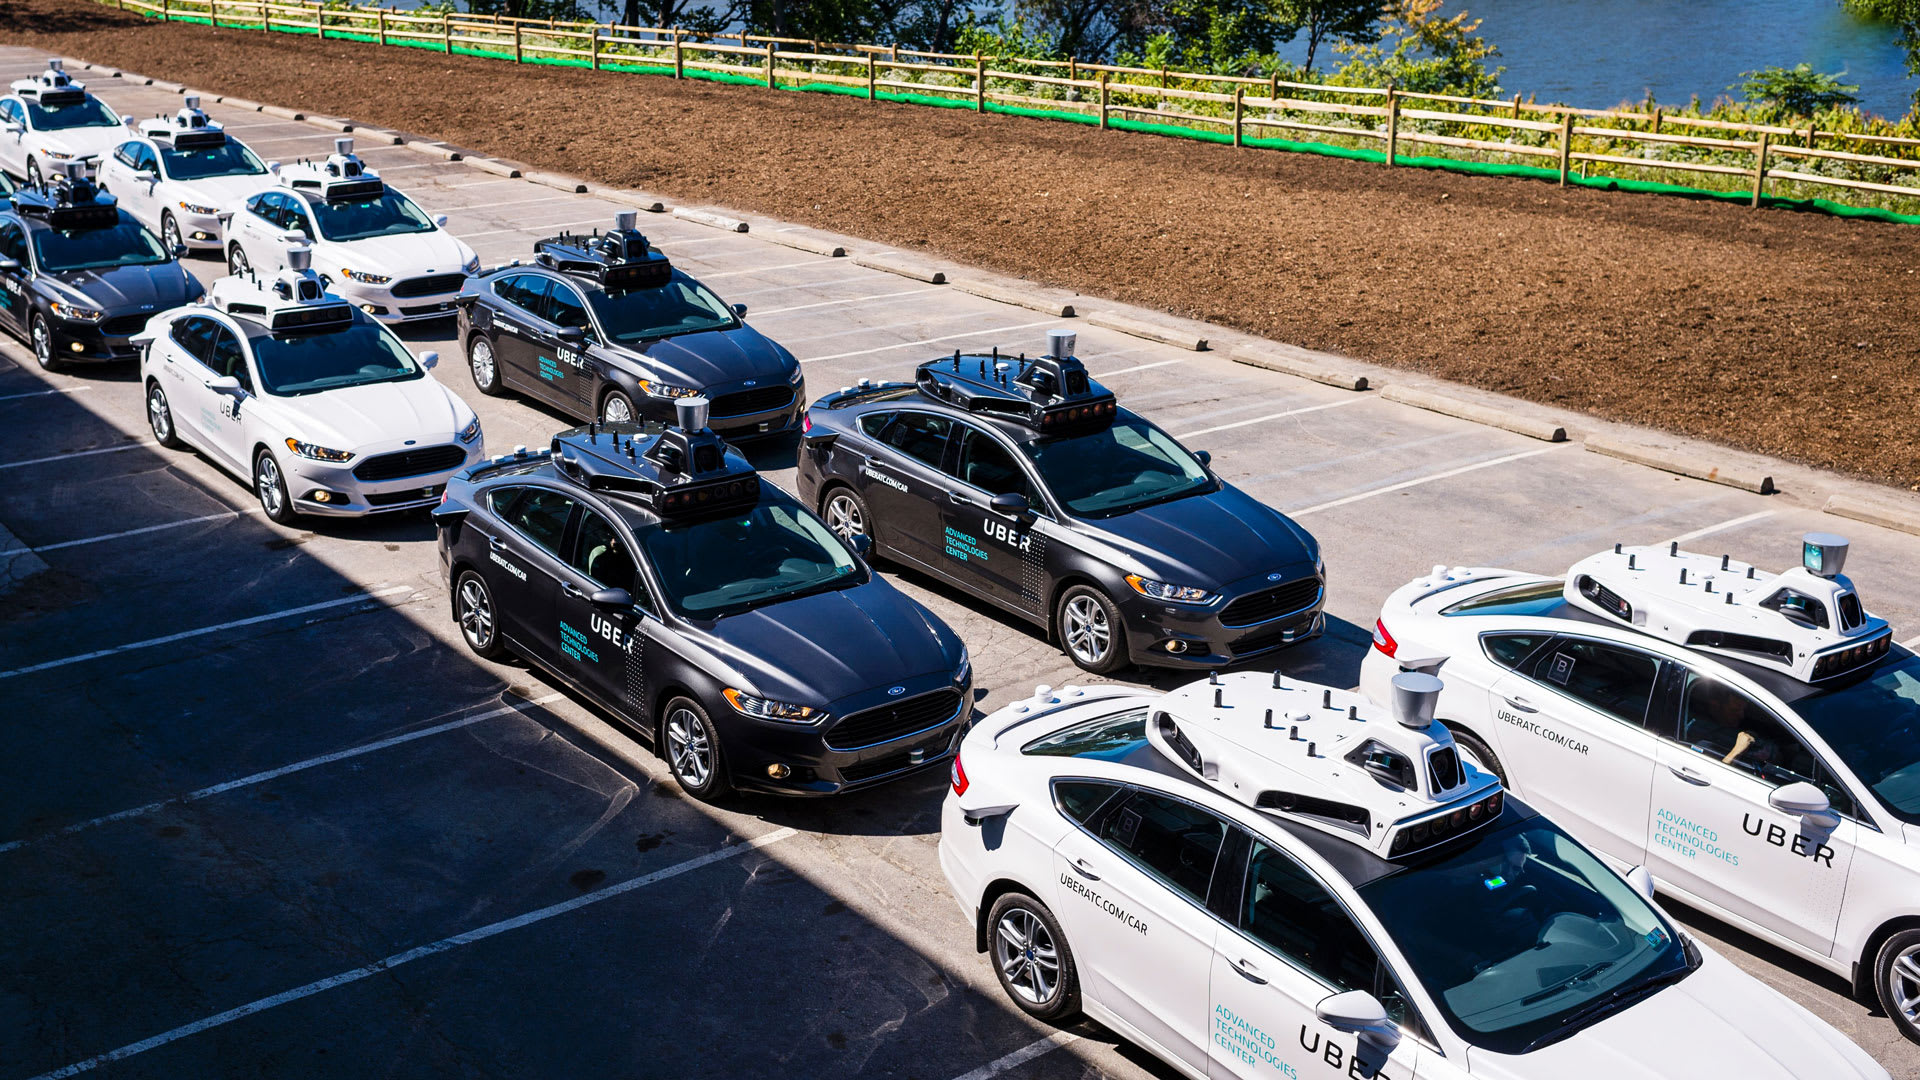 Not so fast: Driverless cars will change everything–but not anytime soon